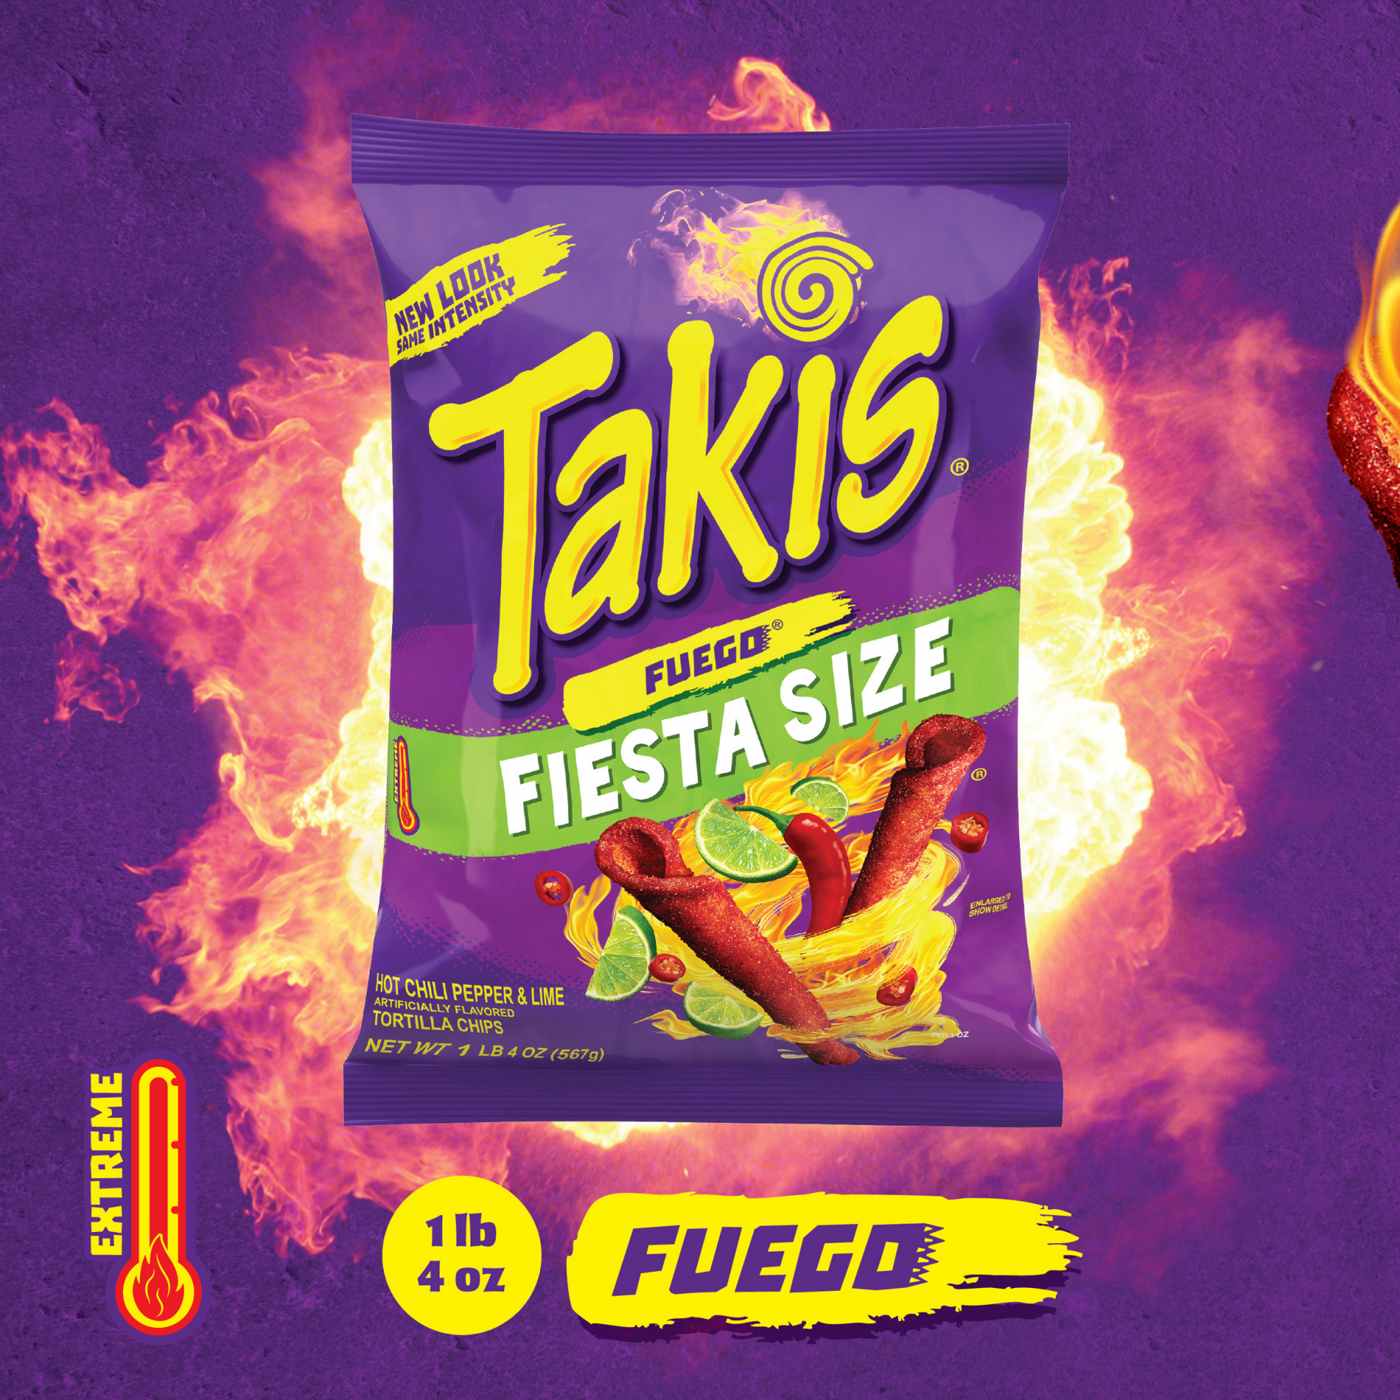 Takis Fuego Hot Chili Pepper & Lime Rolled Tortilla Chips Fiesta Size; image 7 of 8